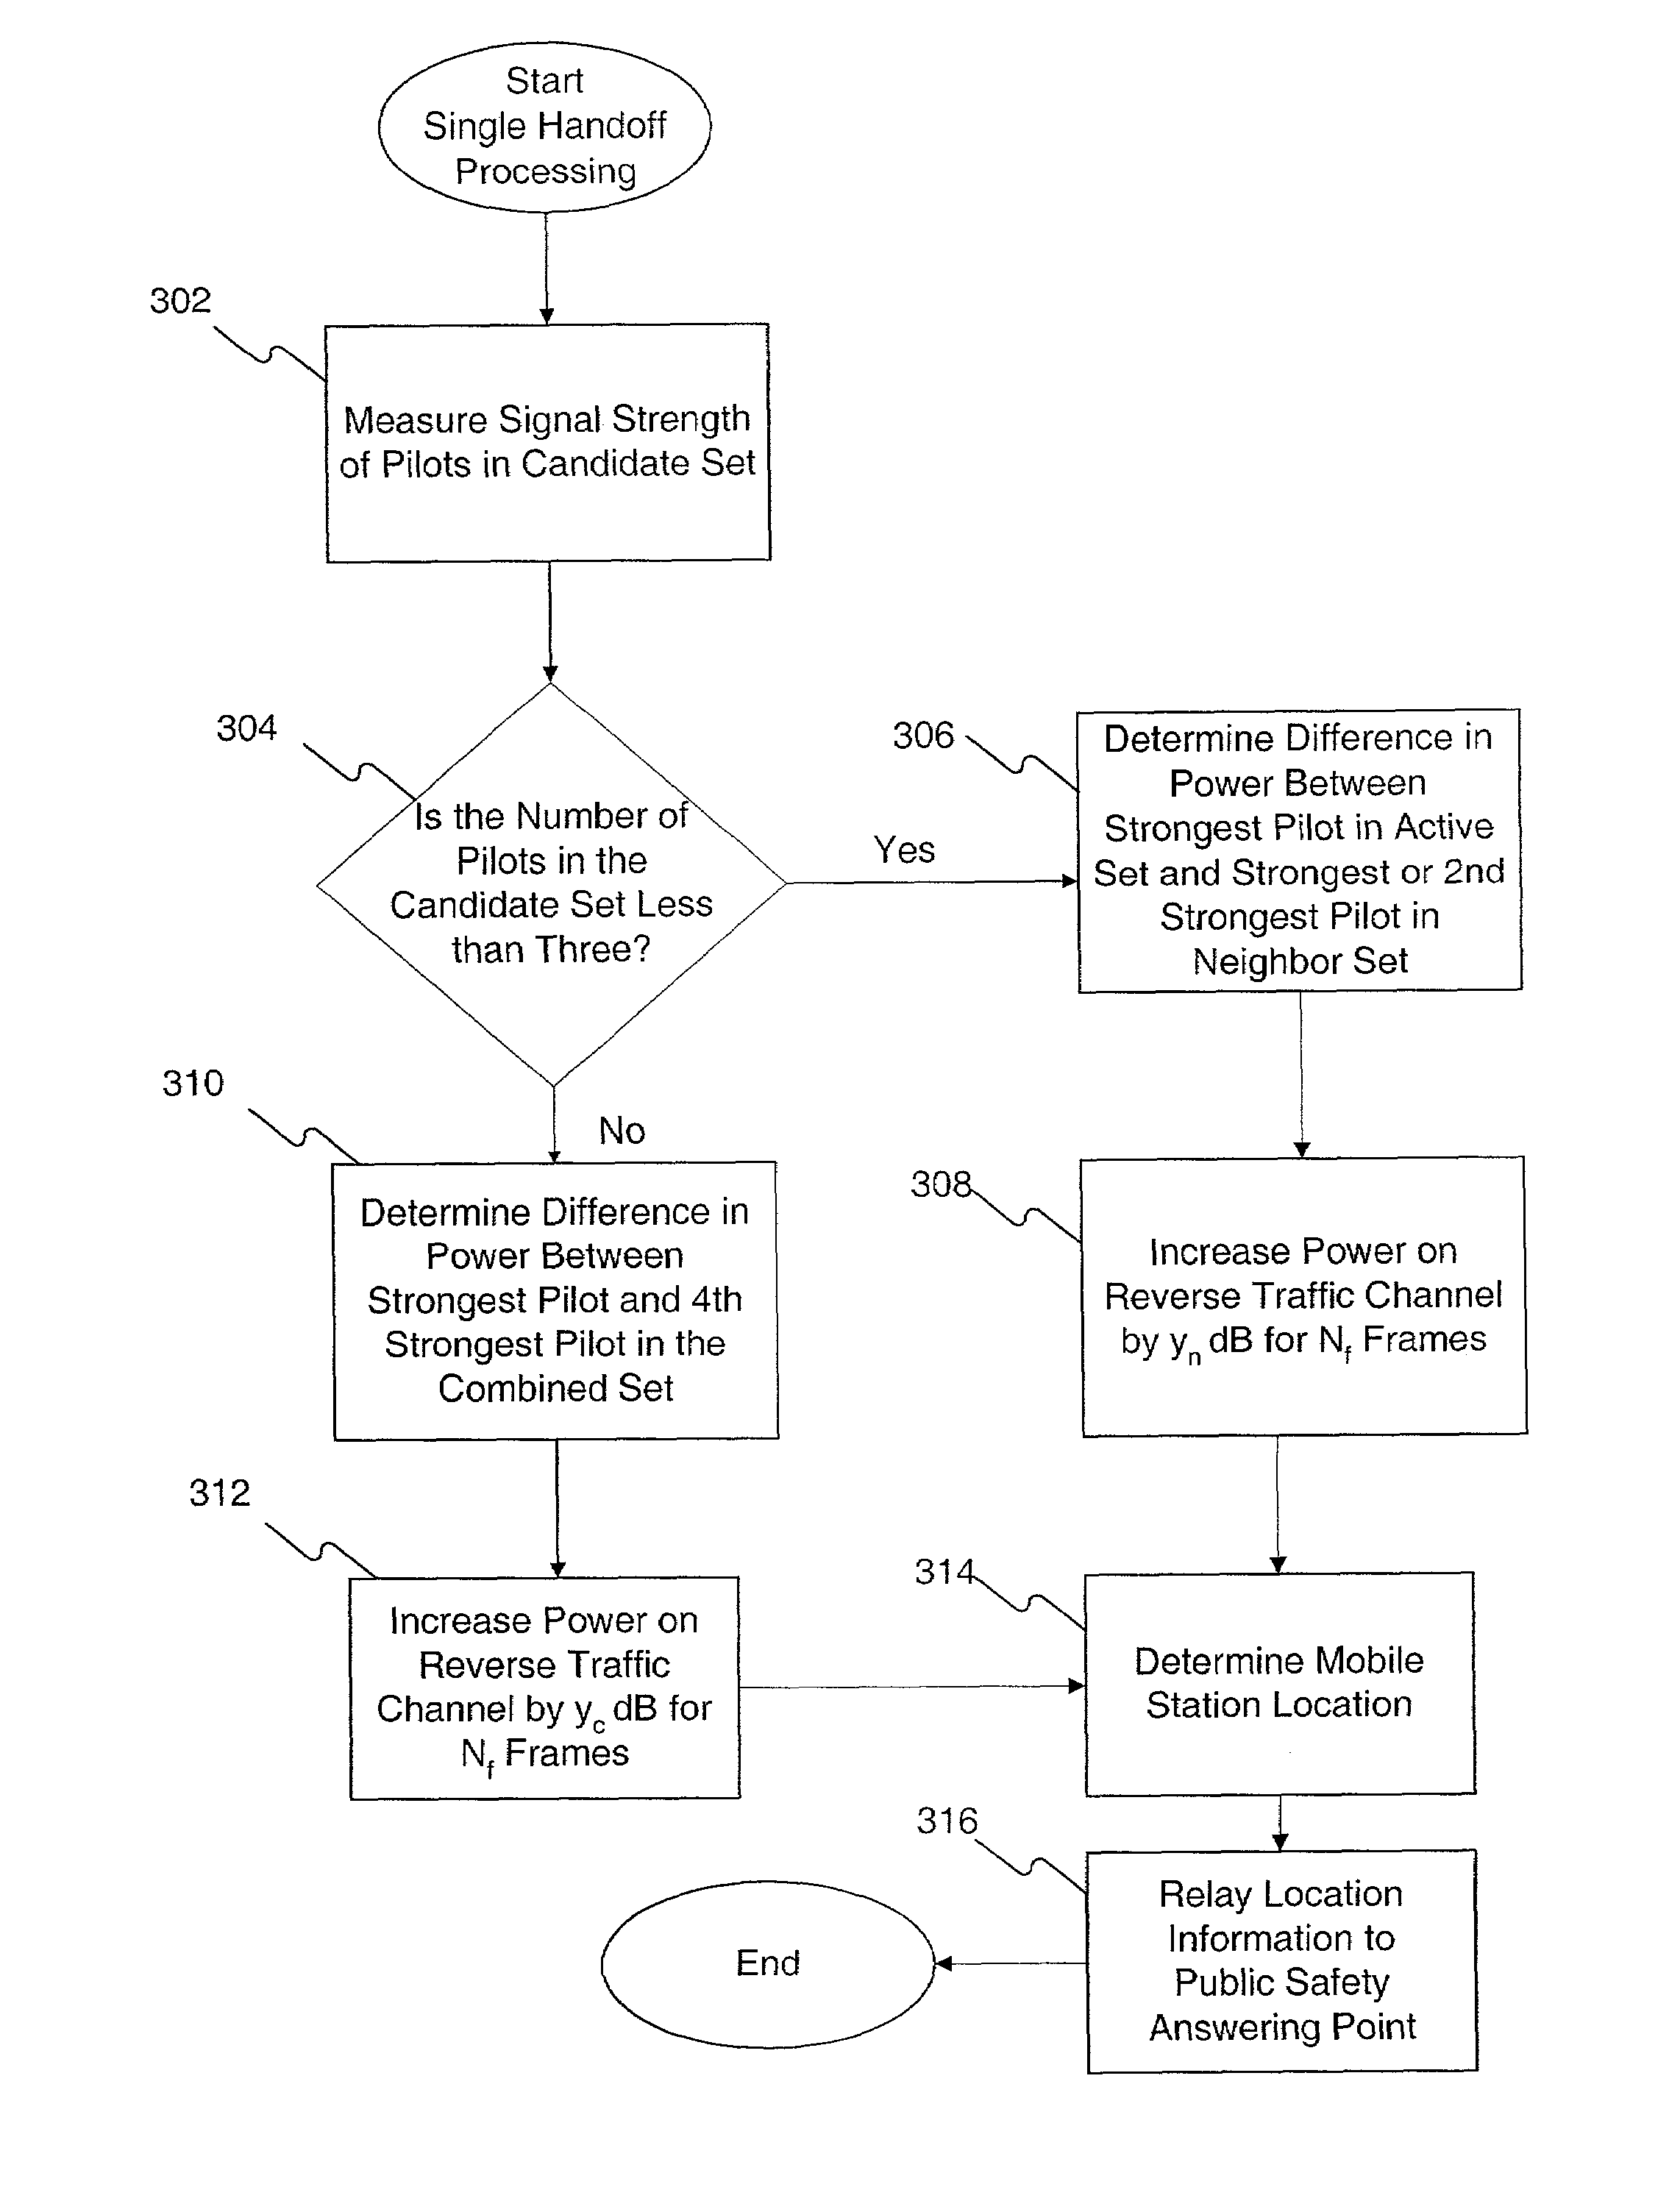 Method and system for mobile location detection using handoff information